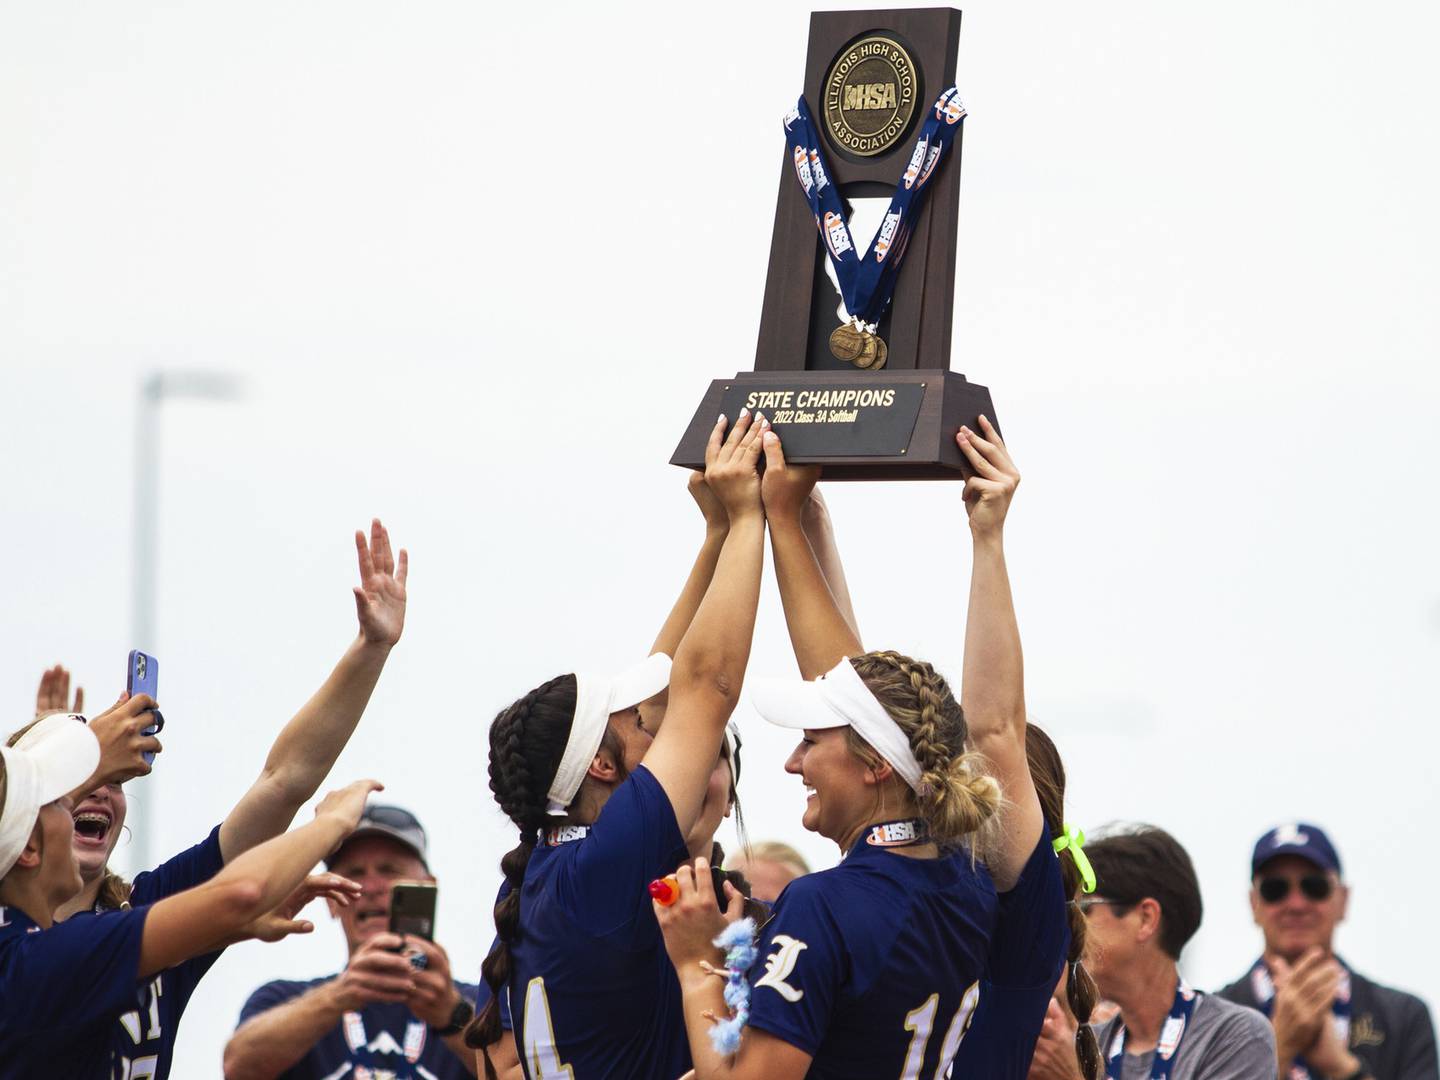 Lemont’s Sage Mardjetko, center, celebrates as her teammates hoist up the Class 3A state championship trophy on Saturday, June 11, 2022.